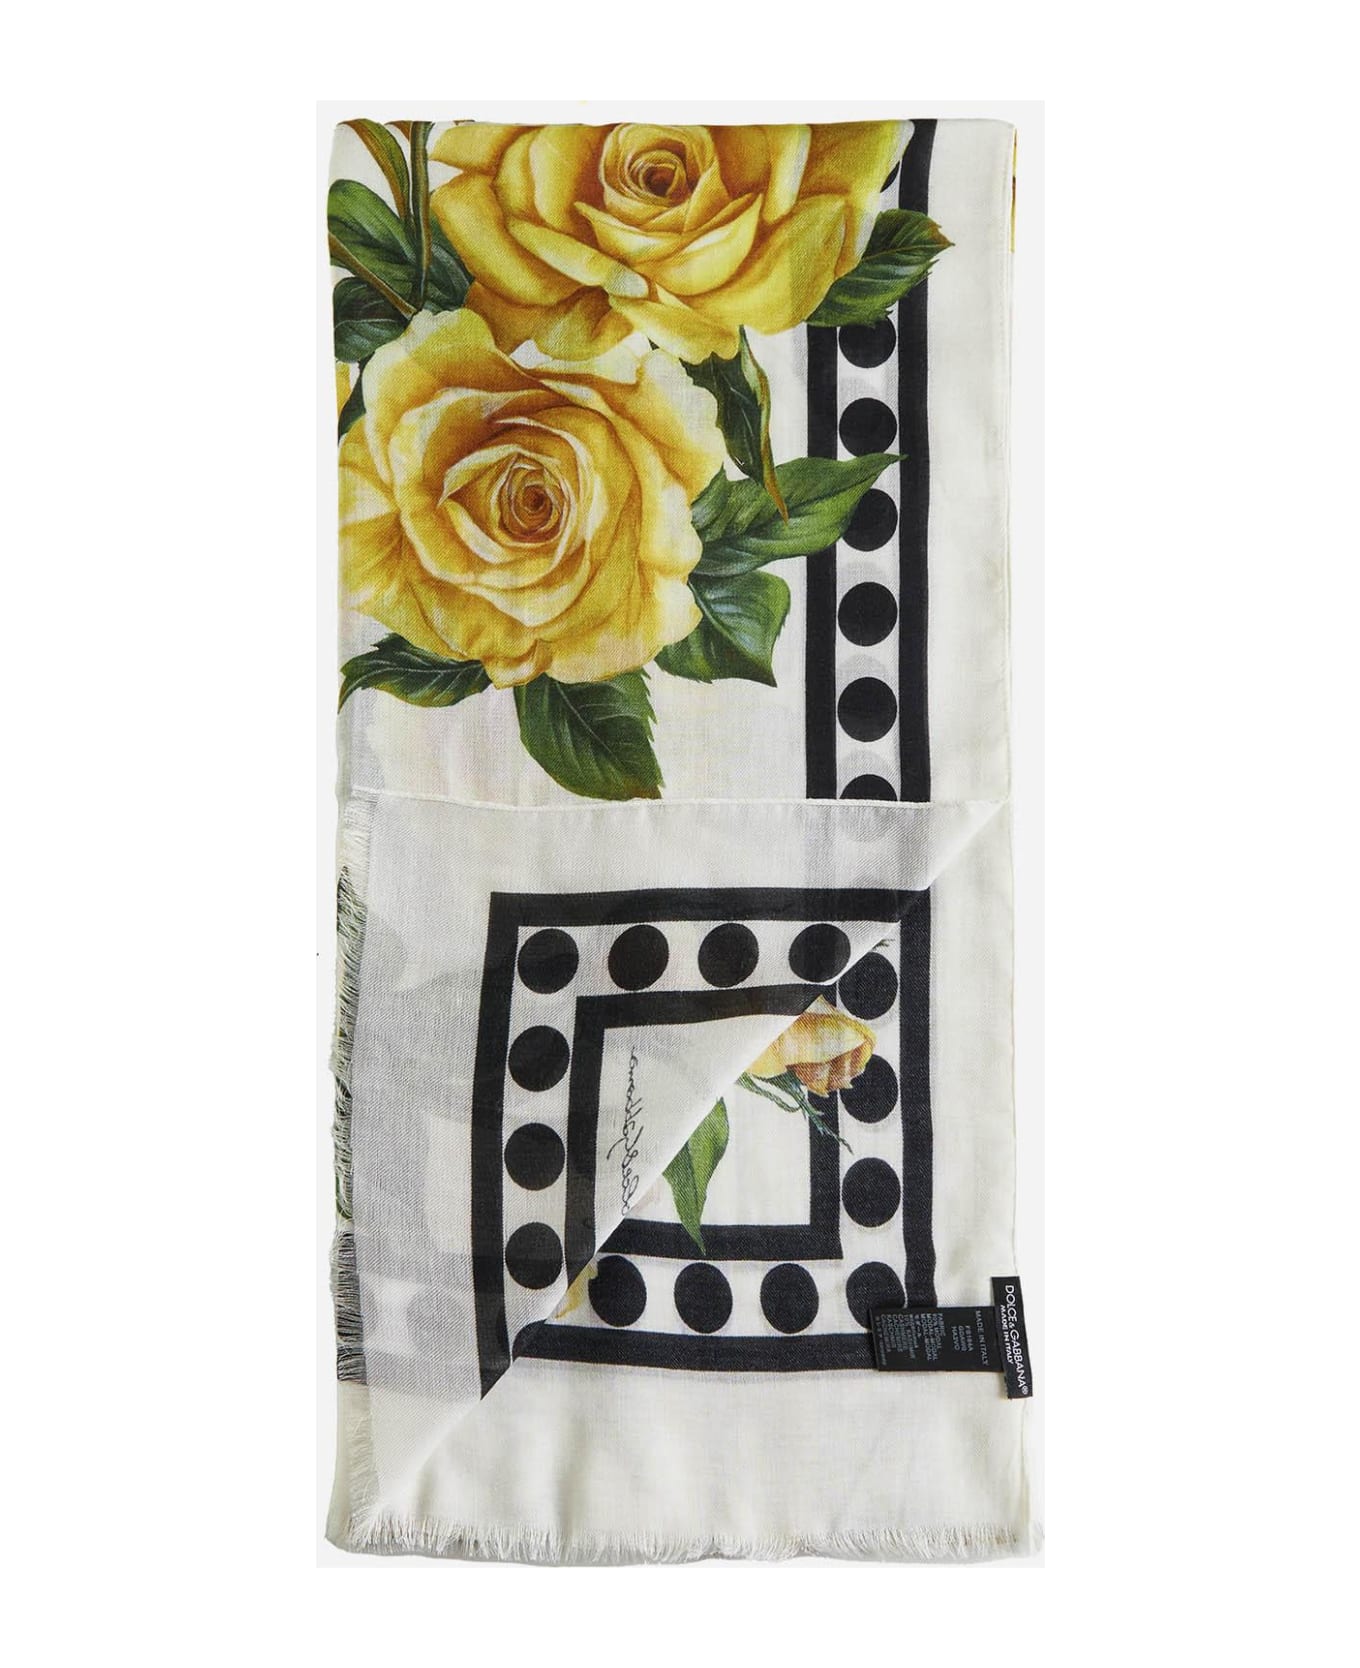 Dolce & Gabbana Modal And Cashmere Scarf - Rose gialle fdo bco スカーフ＆ストール